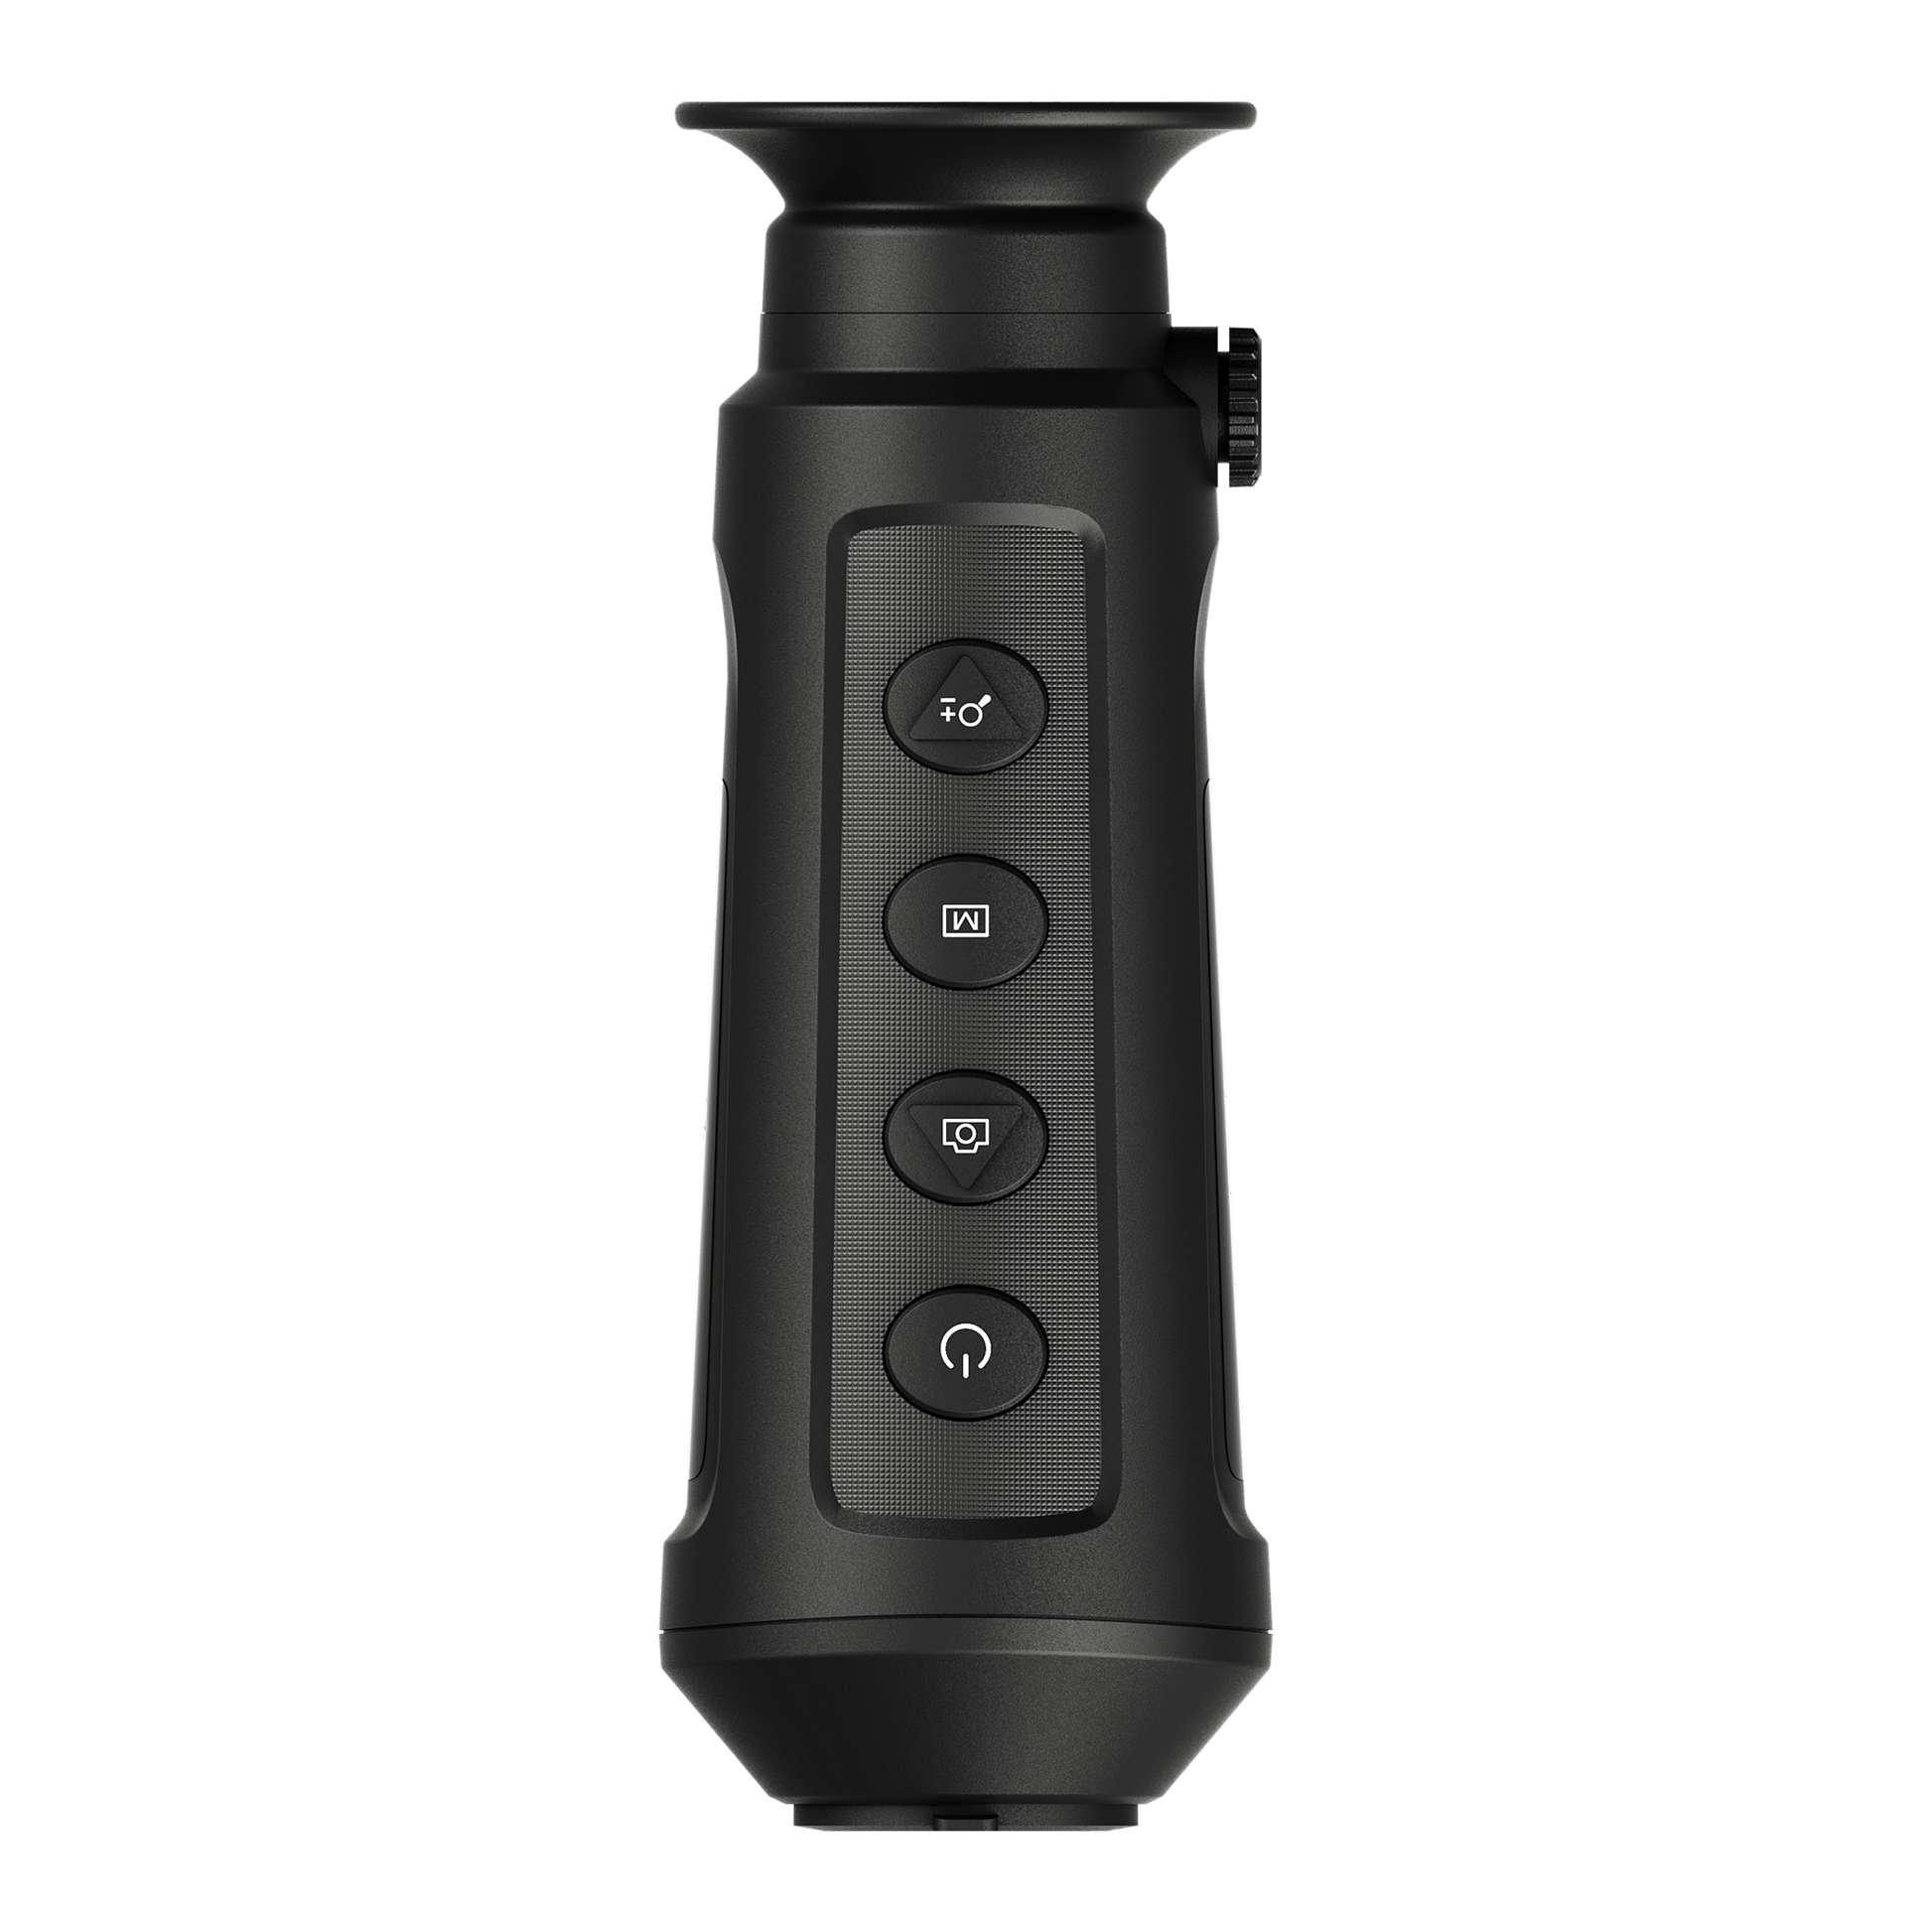 Lynx Pro LE15S Monocular top view showing navigational buttons